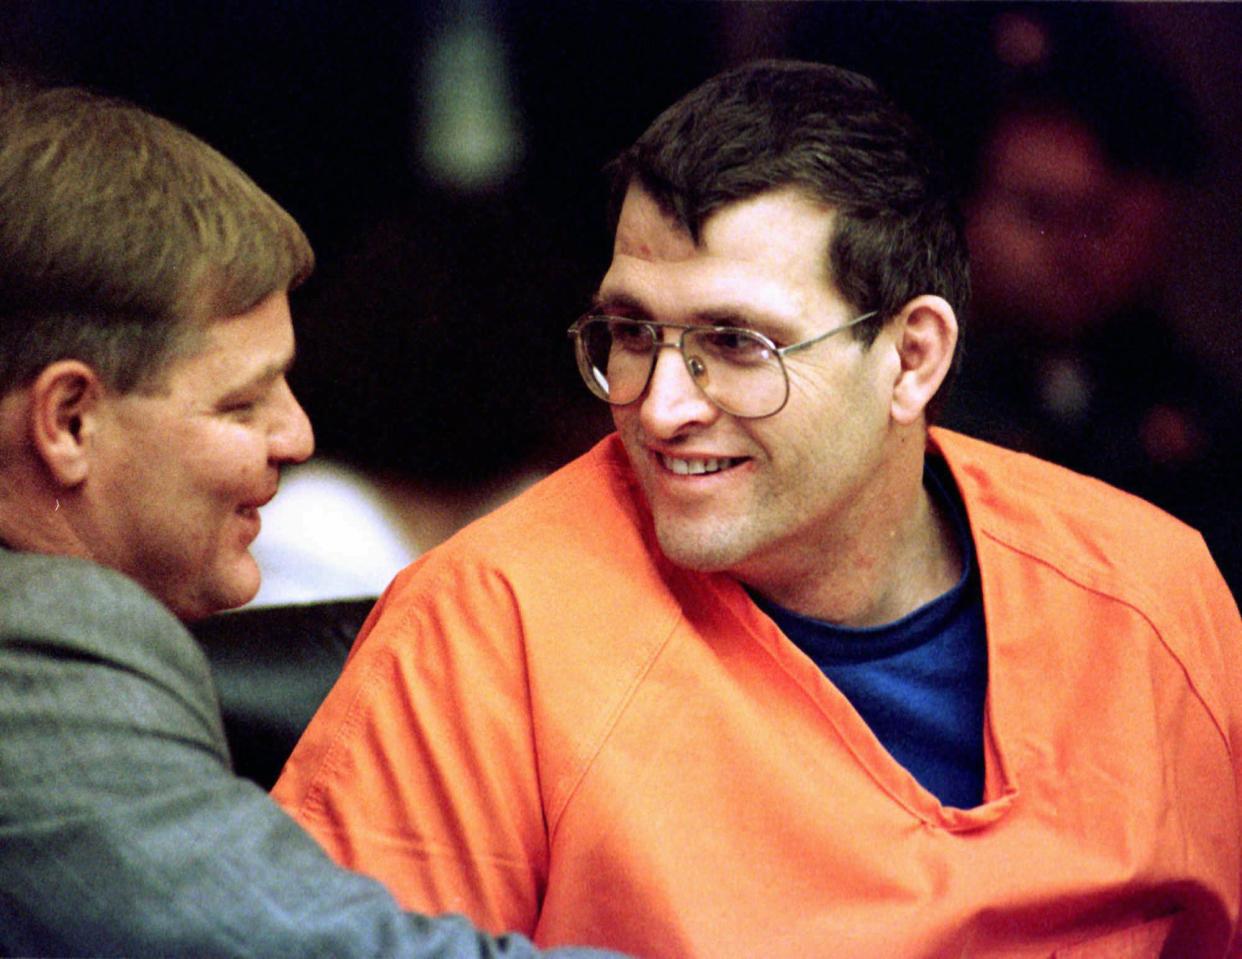 Convicted murderer Keith Jesperson, right,  shown here at a Nov. 2, 1995,  court appearance in Portland, Ore., with attorney Thomas Phelan.